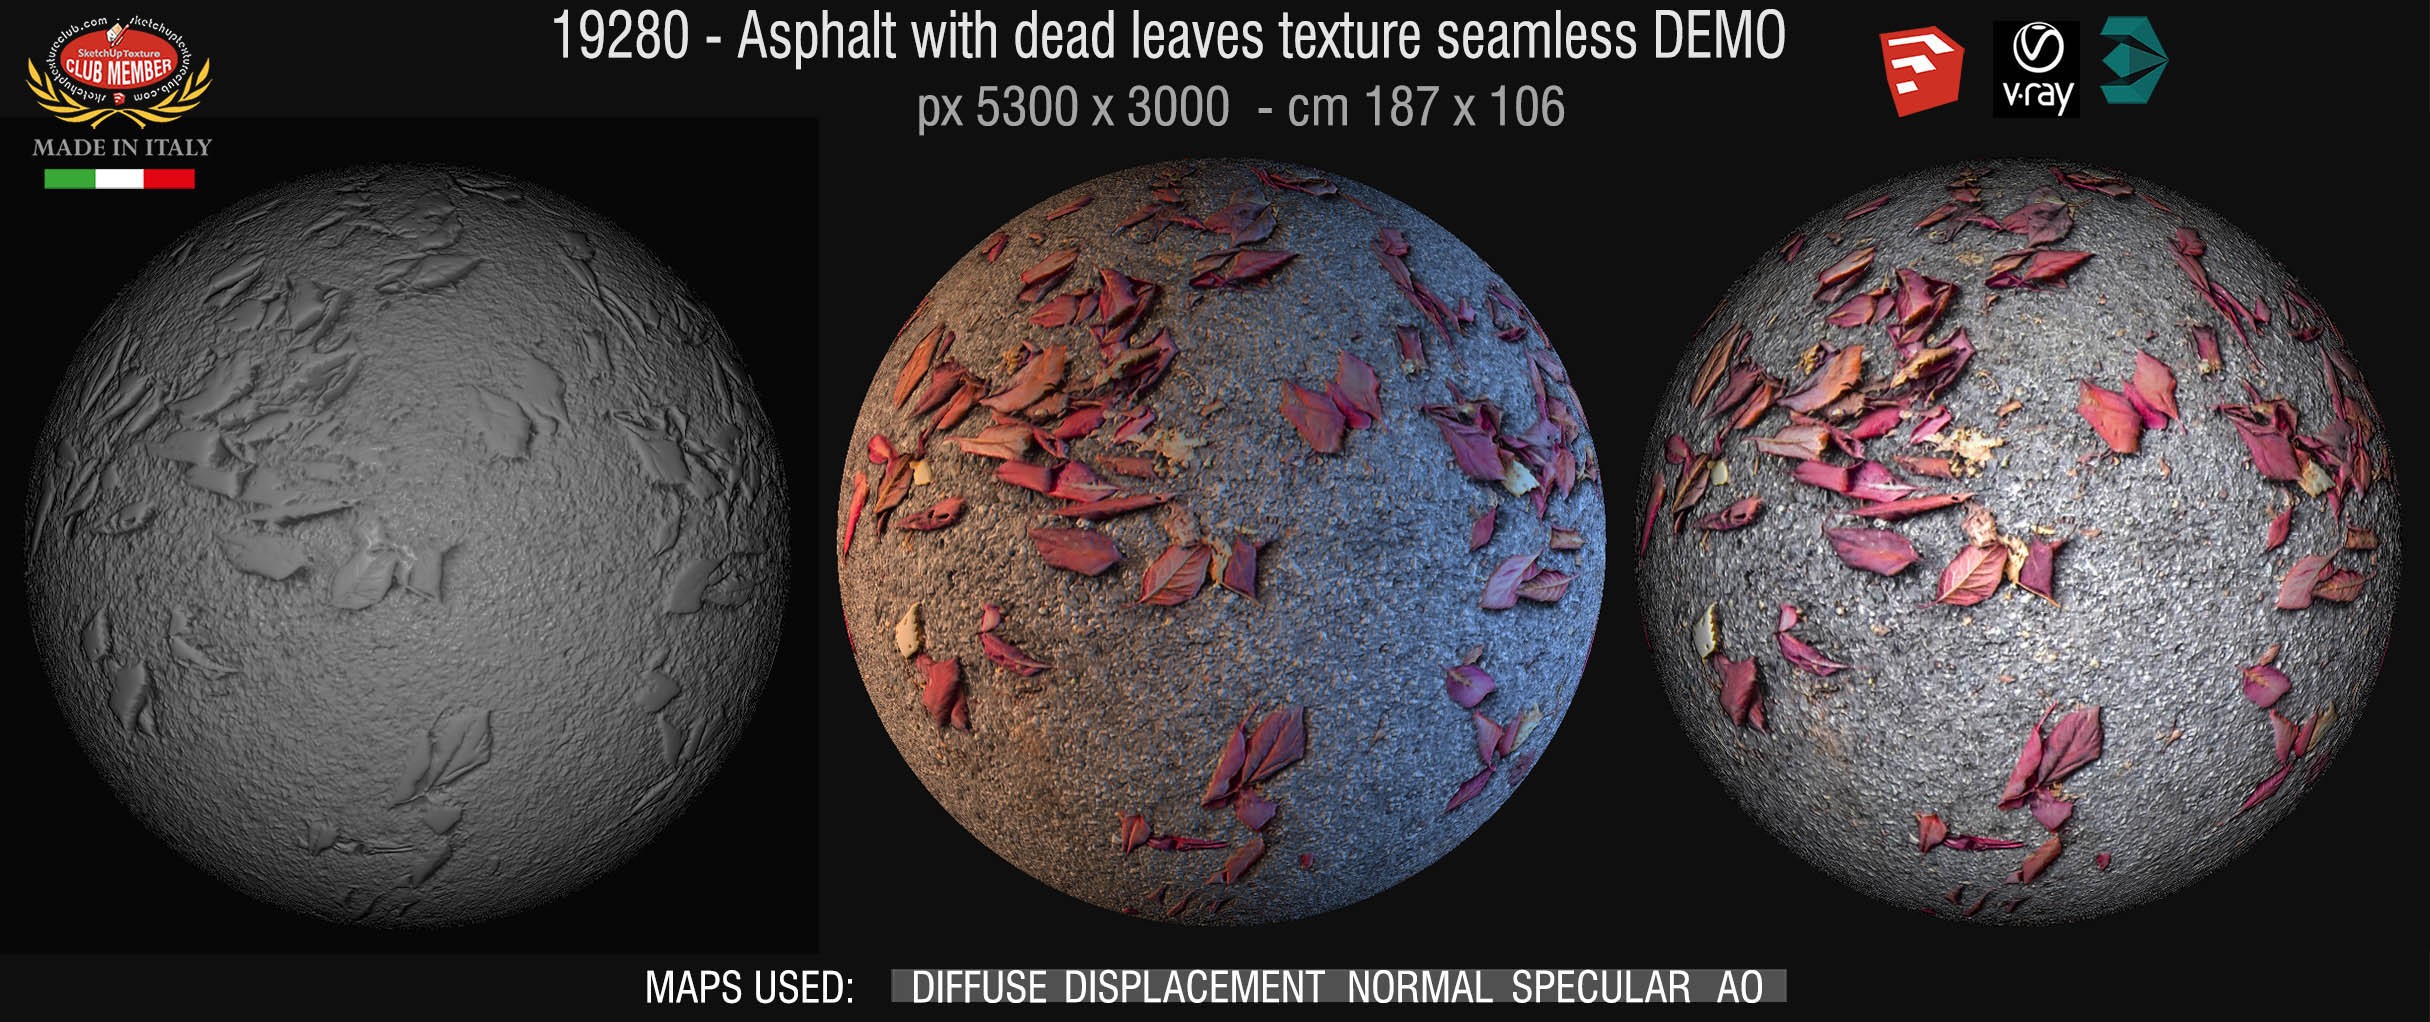 19280 Asphalt with dead leaves texture seamless + maps DEMO